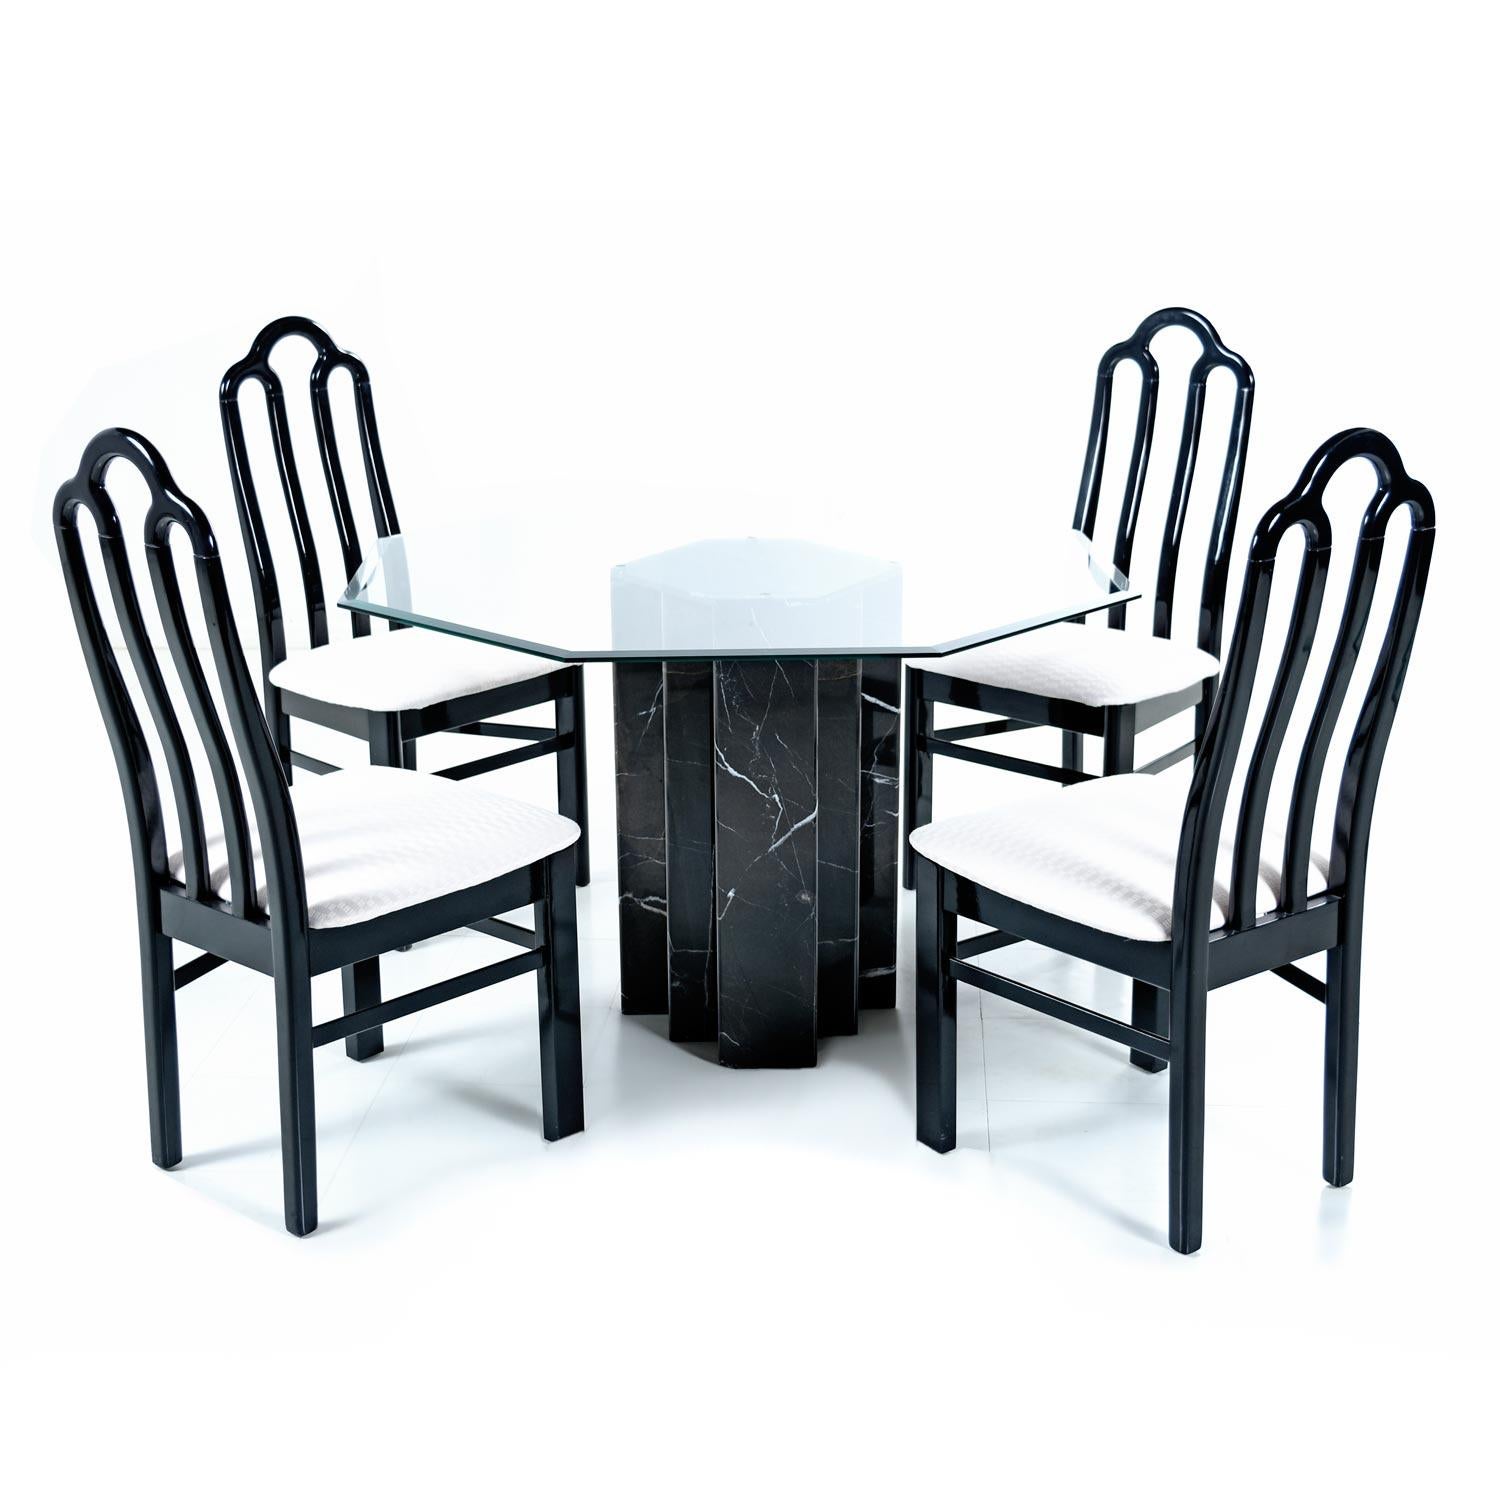 This handsome dining table has a regal presence with it’s stately, yet sexy, black marble base. The vintage 1980s dining set has resembles work by Carlo Scarpa. The sleek dining set comes complete, as pictured with a dining table and four chairs.